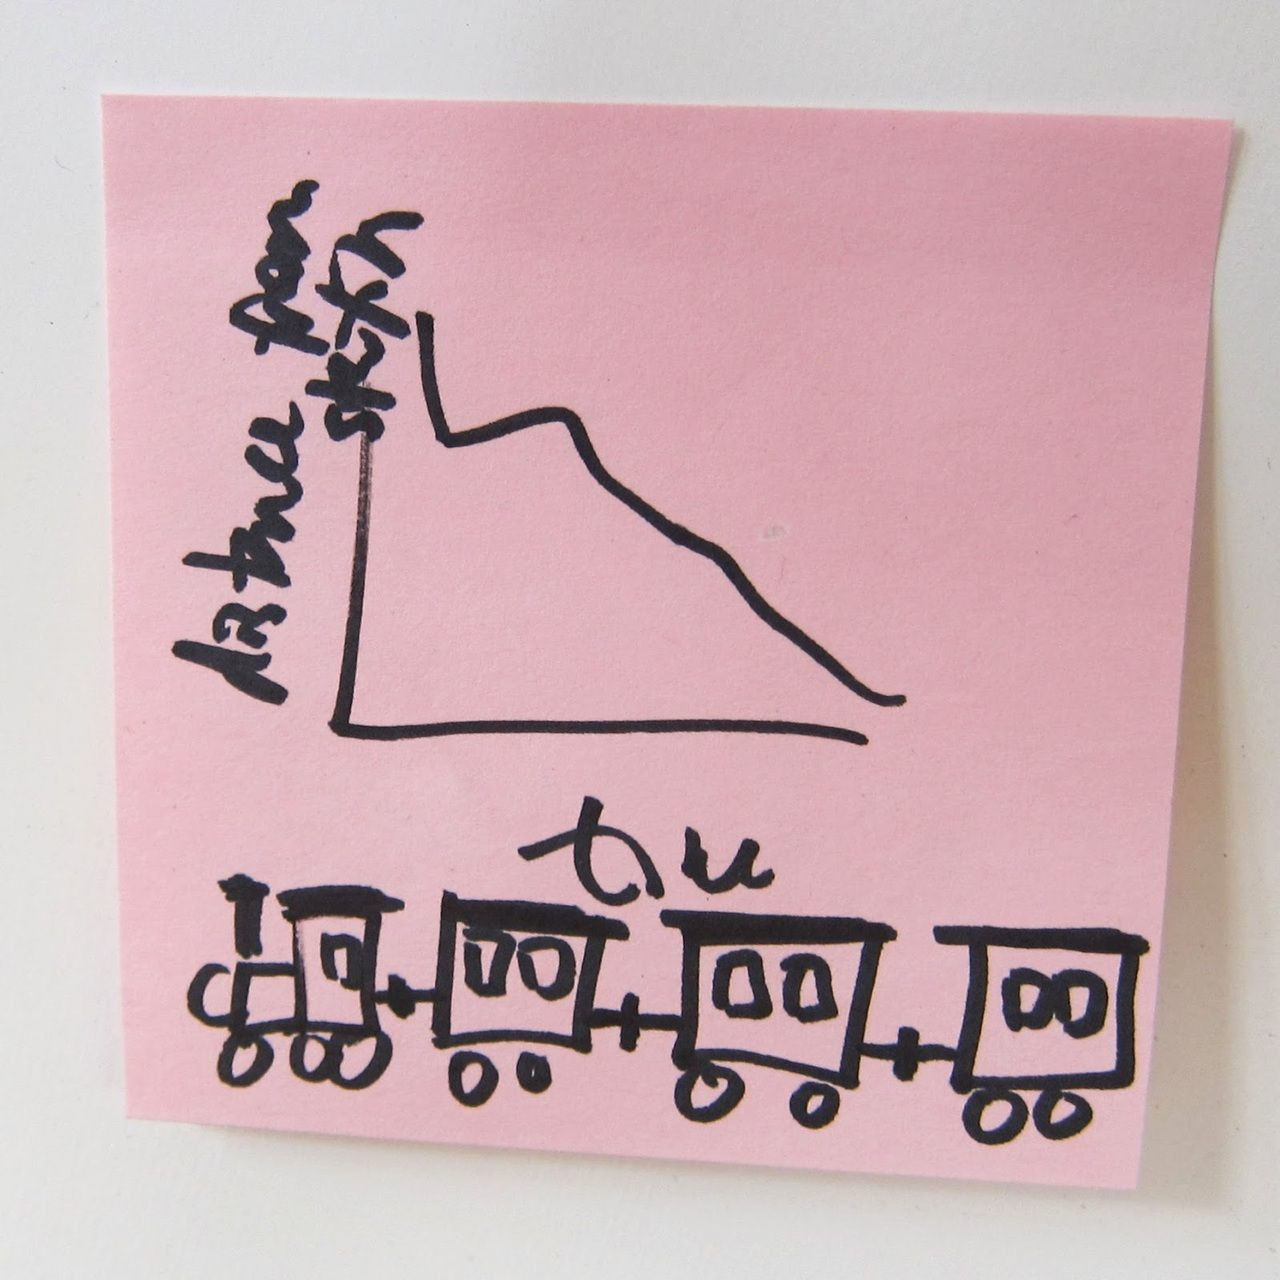 Another cute drawing of a train